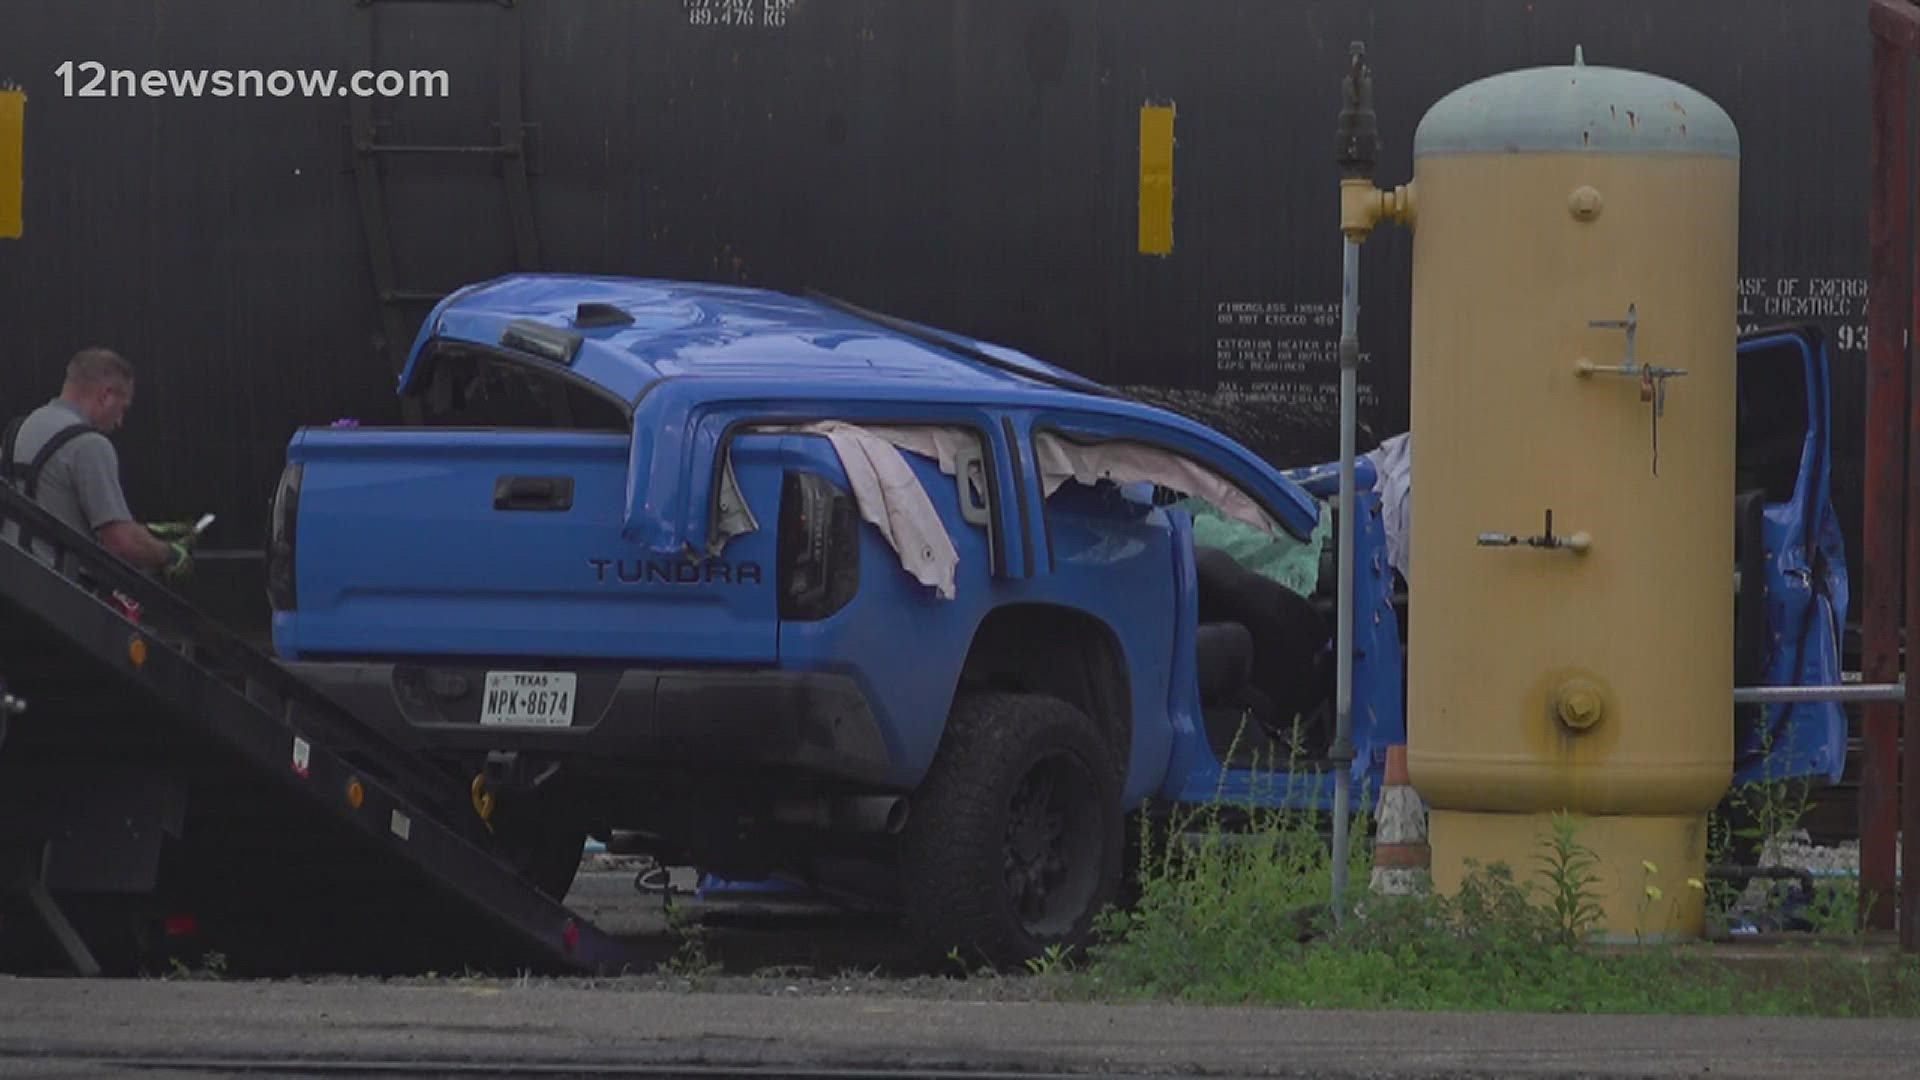 Beaumont Police are investigating after a small truck struck a train at a railyard off College Street Thursday morning.